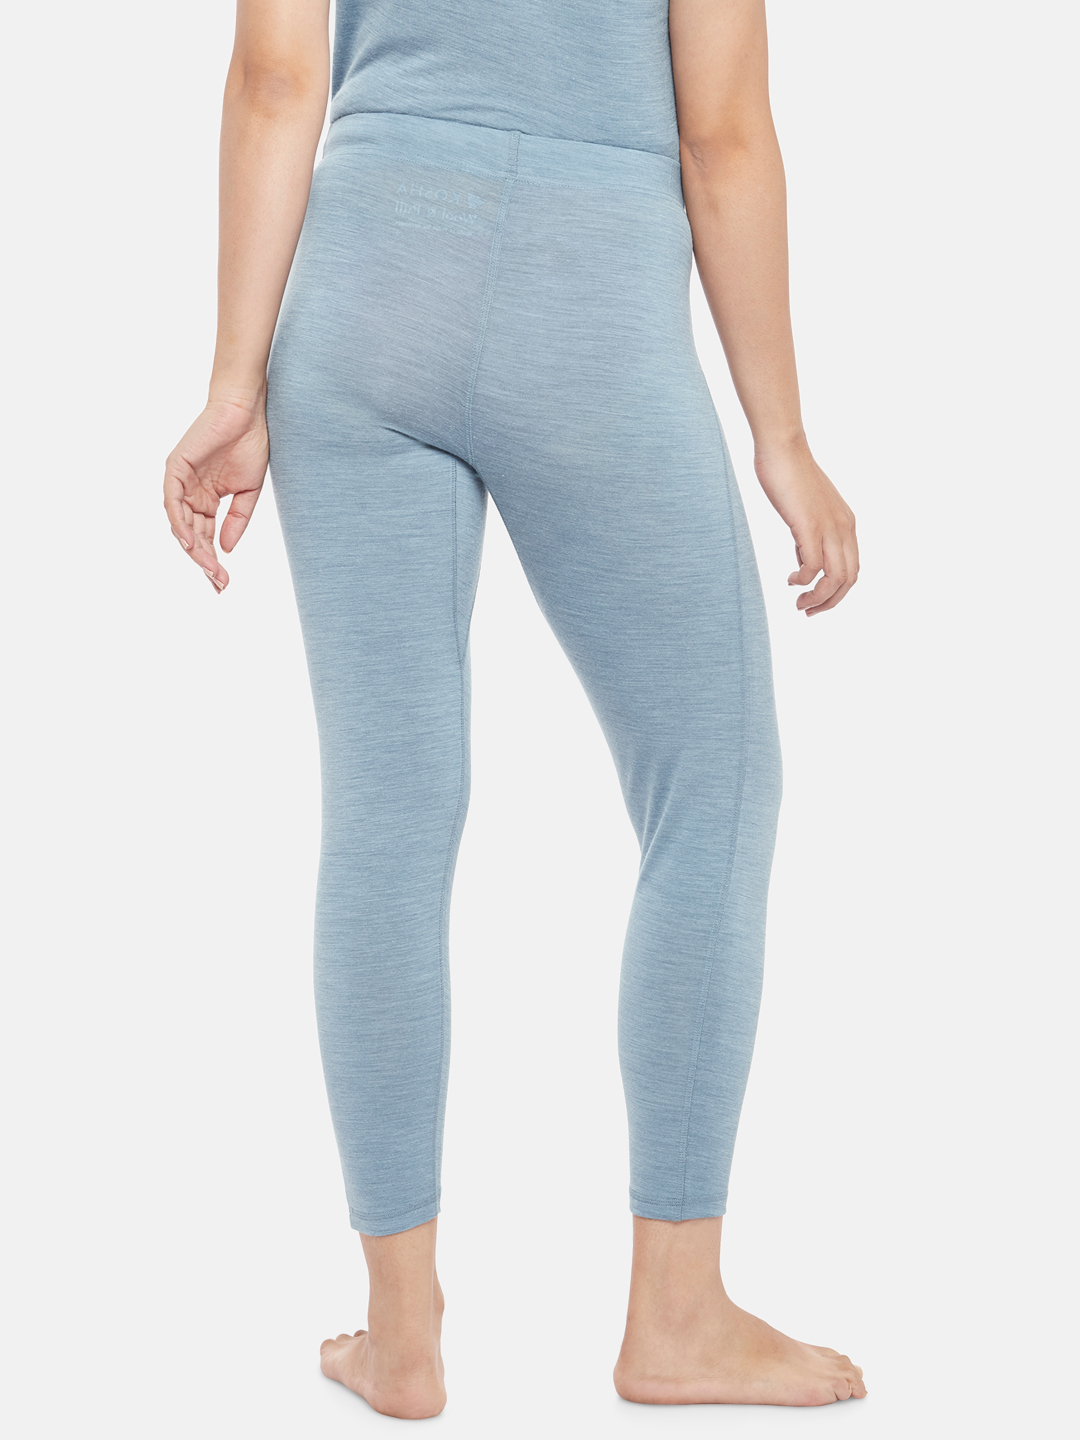 Women's Thermals | Buy the softest thermals by Kosha